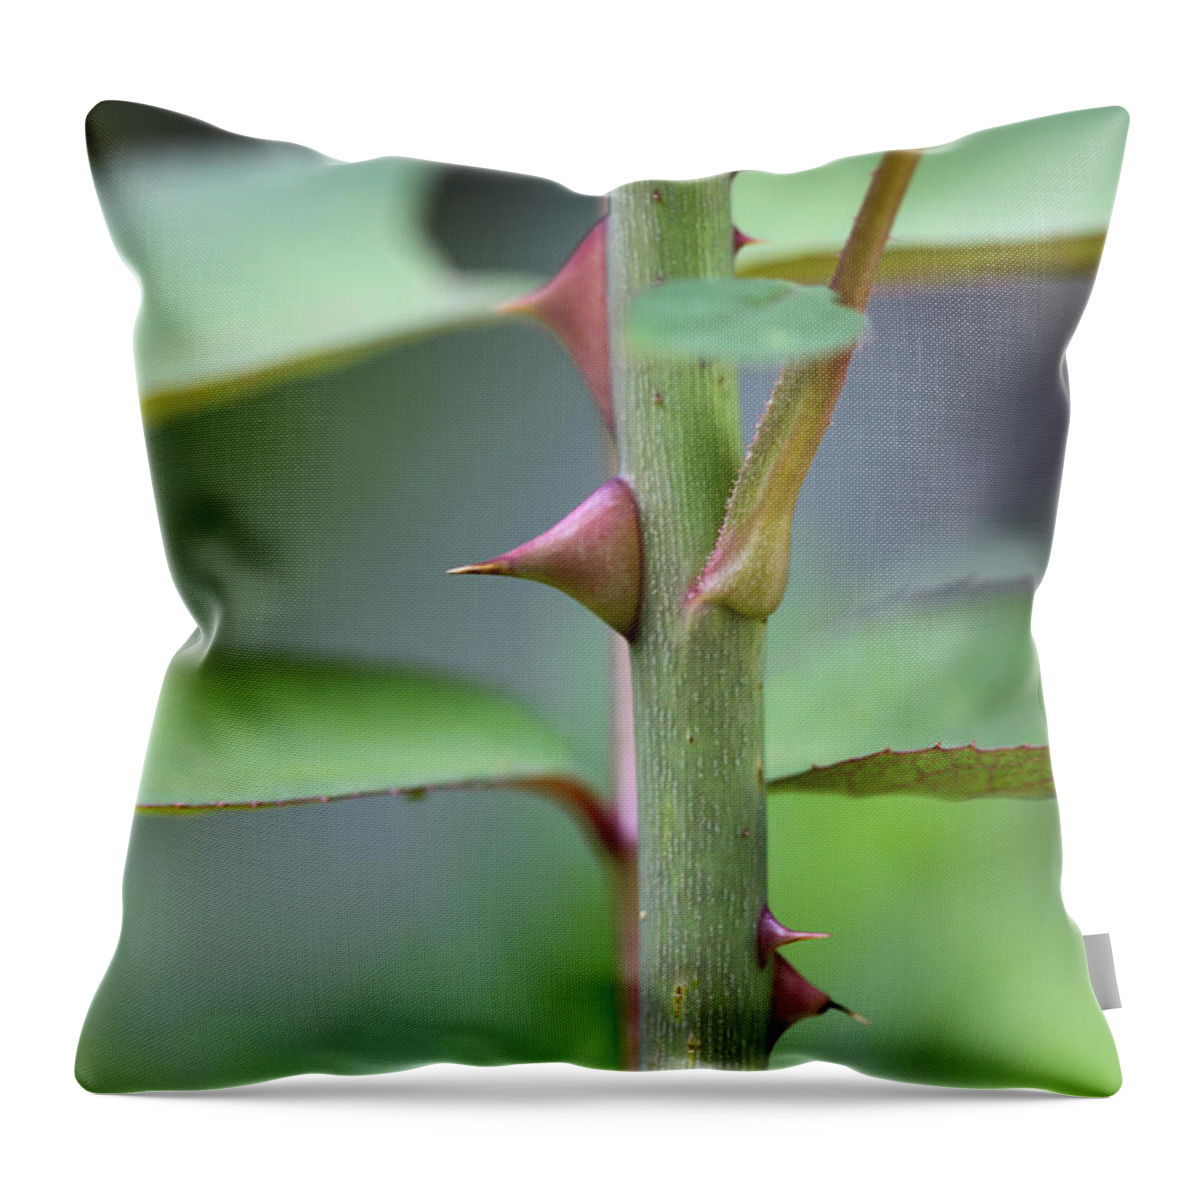 Stem Throw Pillow featuring the photograph Thorny Stem by Todd Blanchard